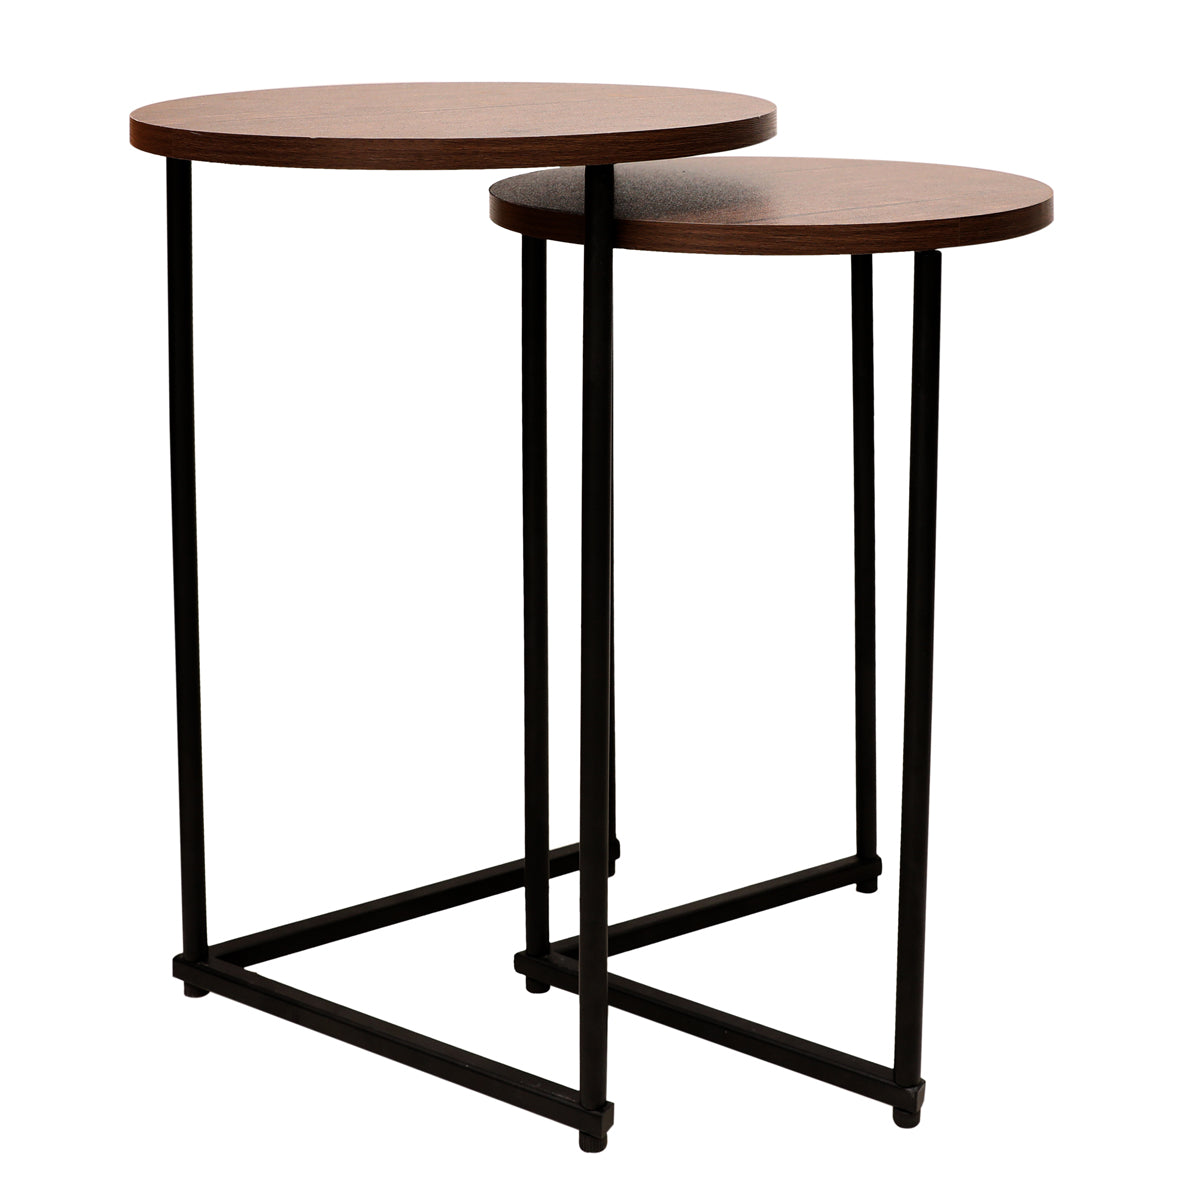 Zack set of 2 nesting tables/ Coffee Tables / Round Tables